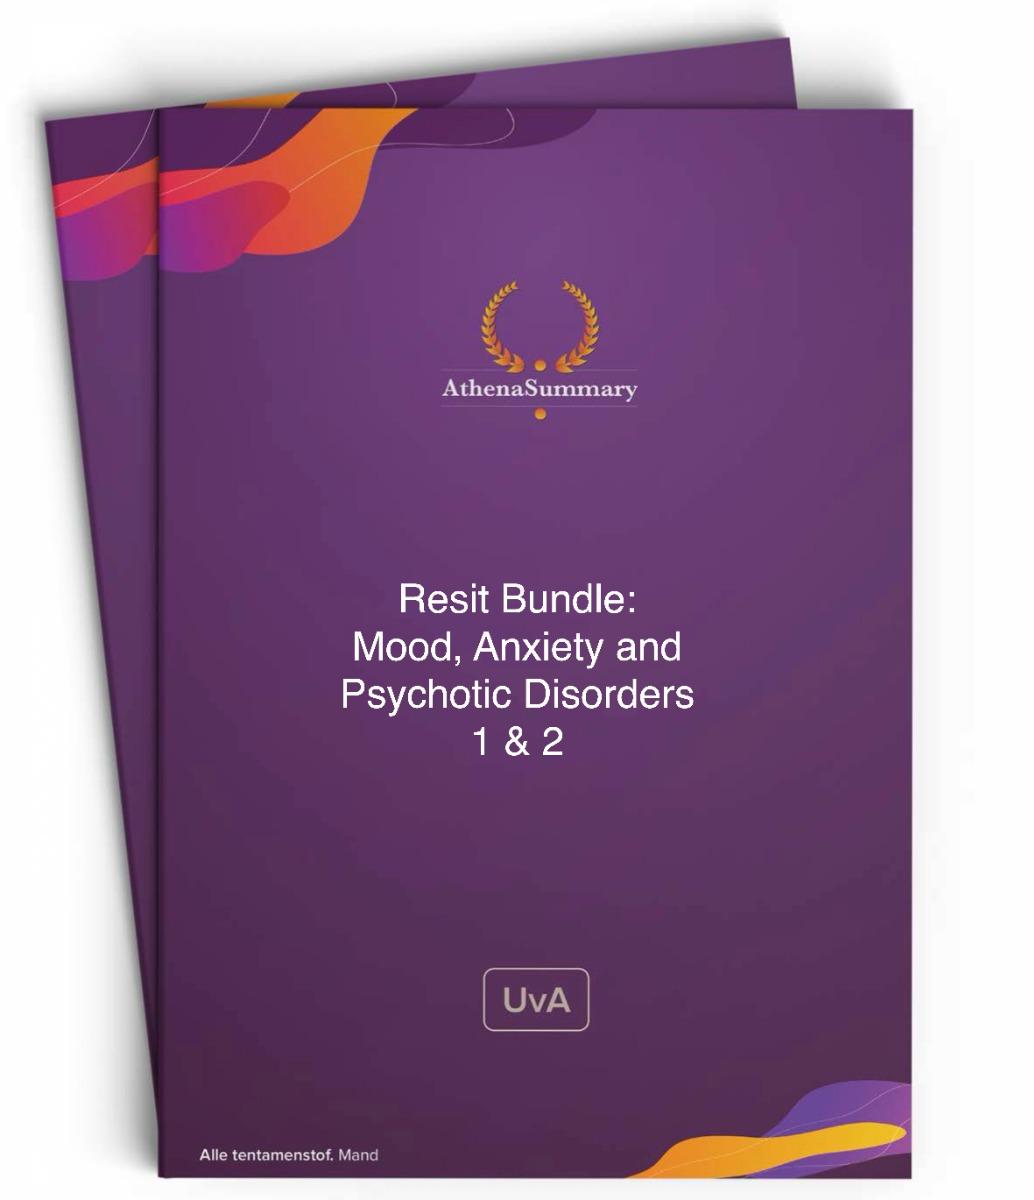 Resit Bundle: Mood, Anxiety and Psychotic Disorders